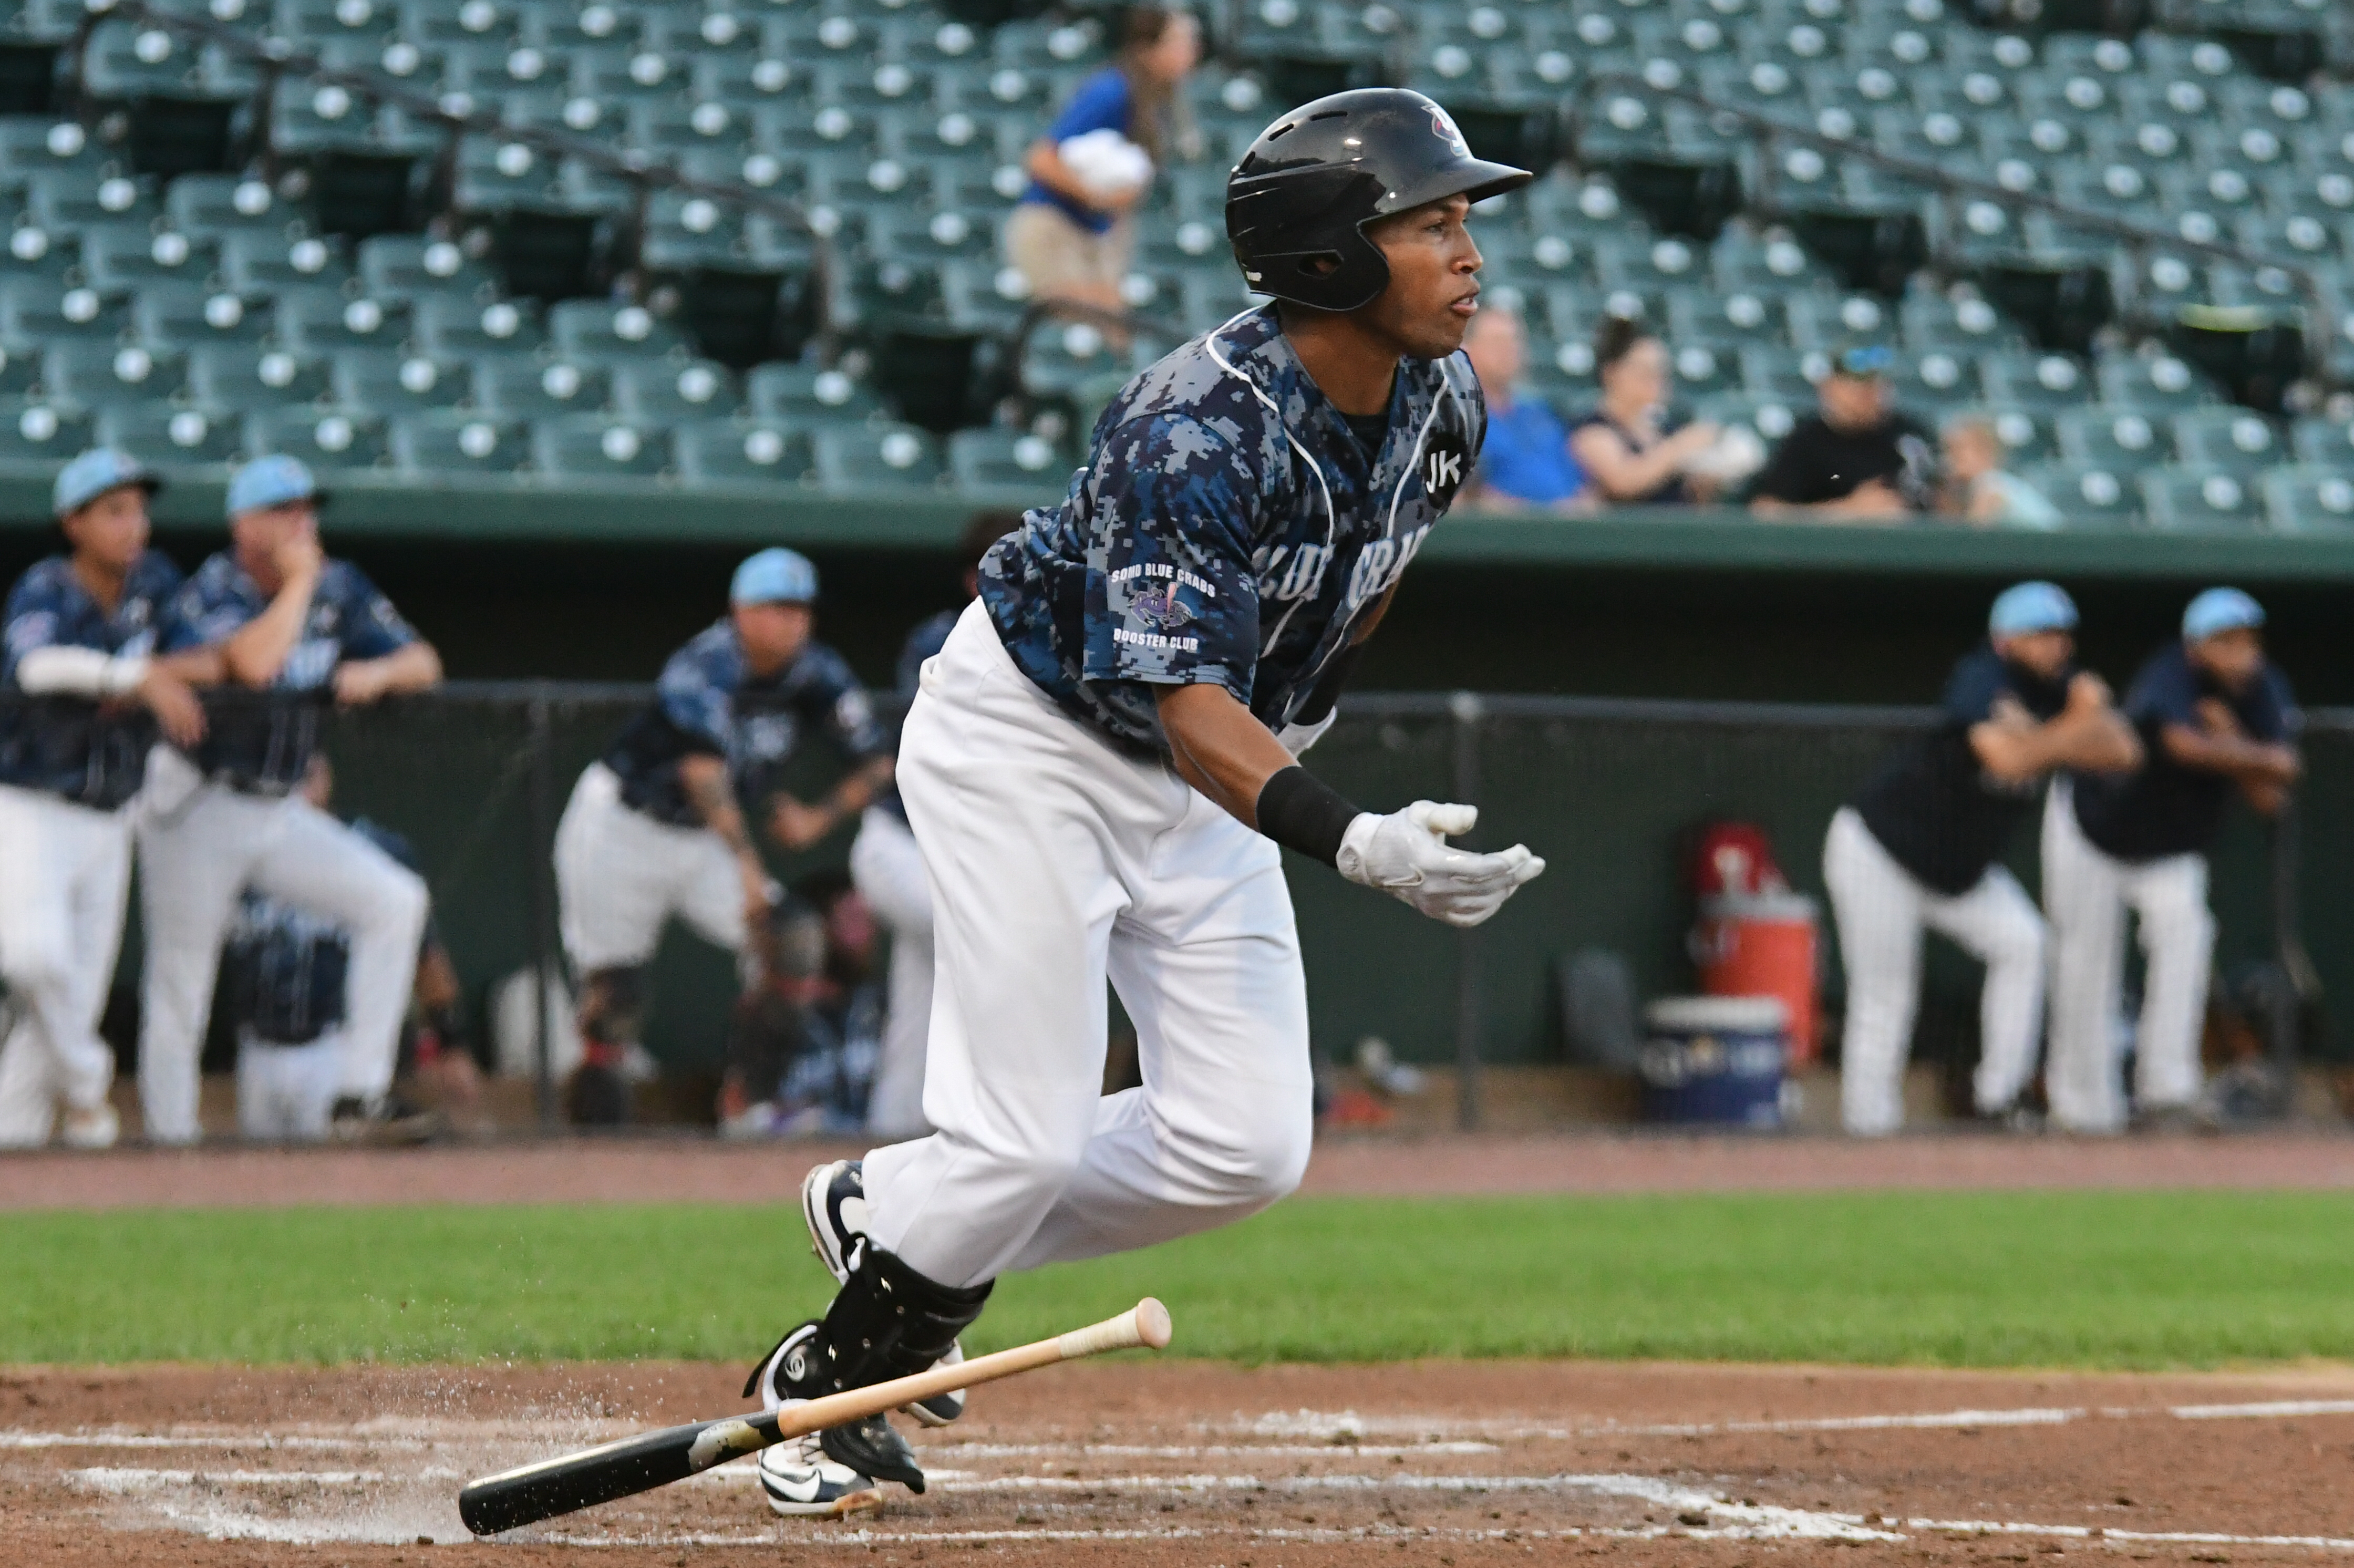 Skeeters Hold On To Early Lead in Game Two